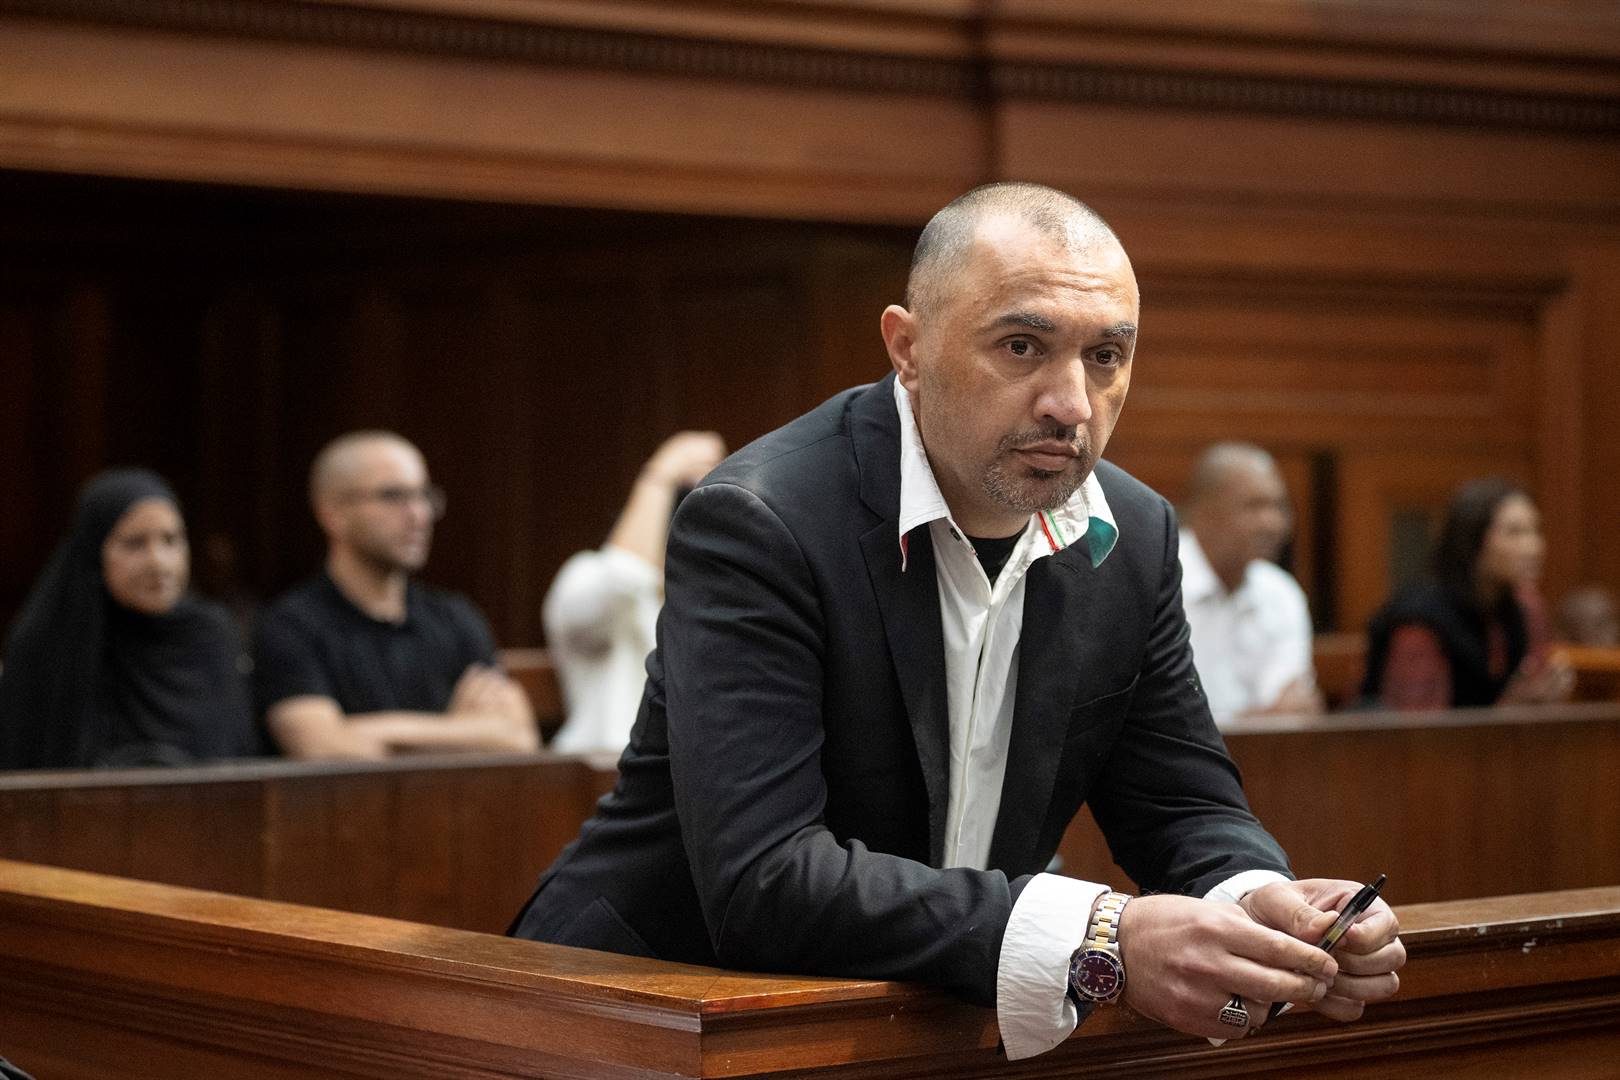 Nafiz Modack appears in the Western Cape High Court during preliminary hearings on 29 January 2024 in Cape Town. (Jaco Marais/Die Burger/Gallo Images)